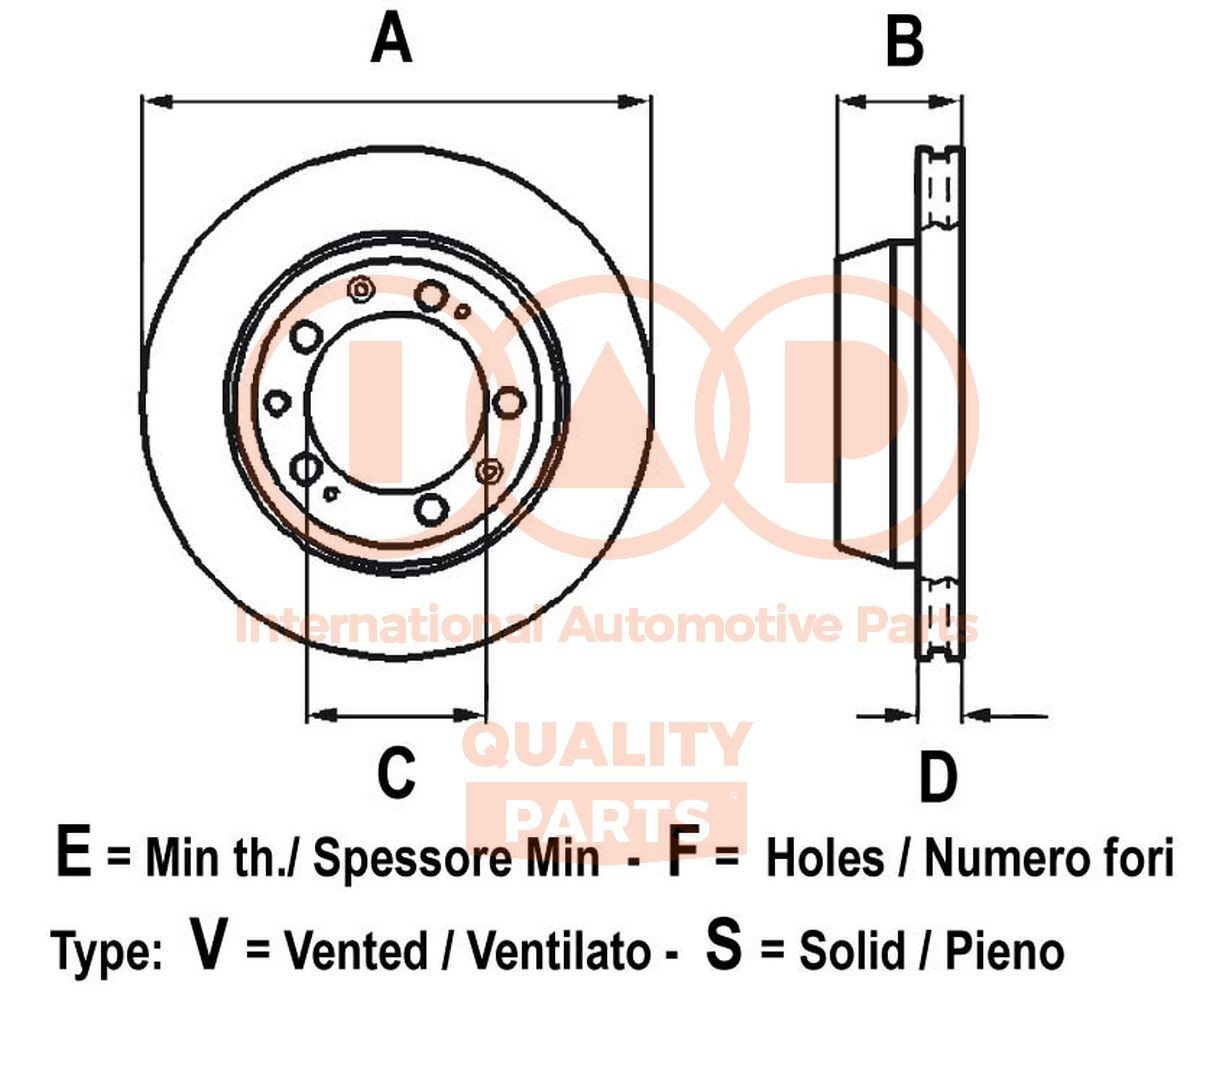 709-11102 IAP QUALITY PARTS Performance brake discs MAZDA Rear Axle, 302x18mm, 5, Vented